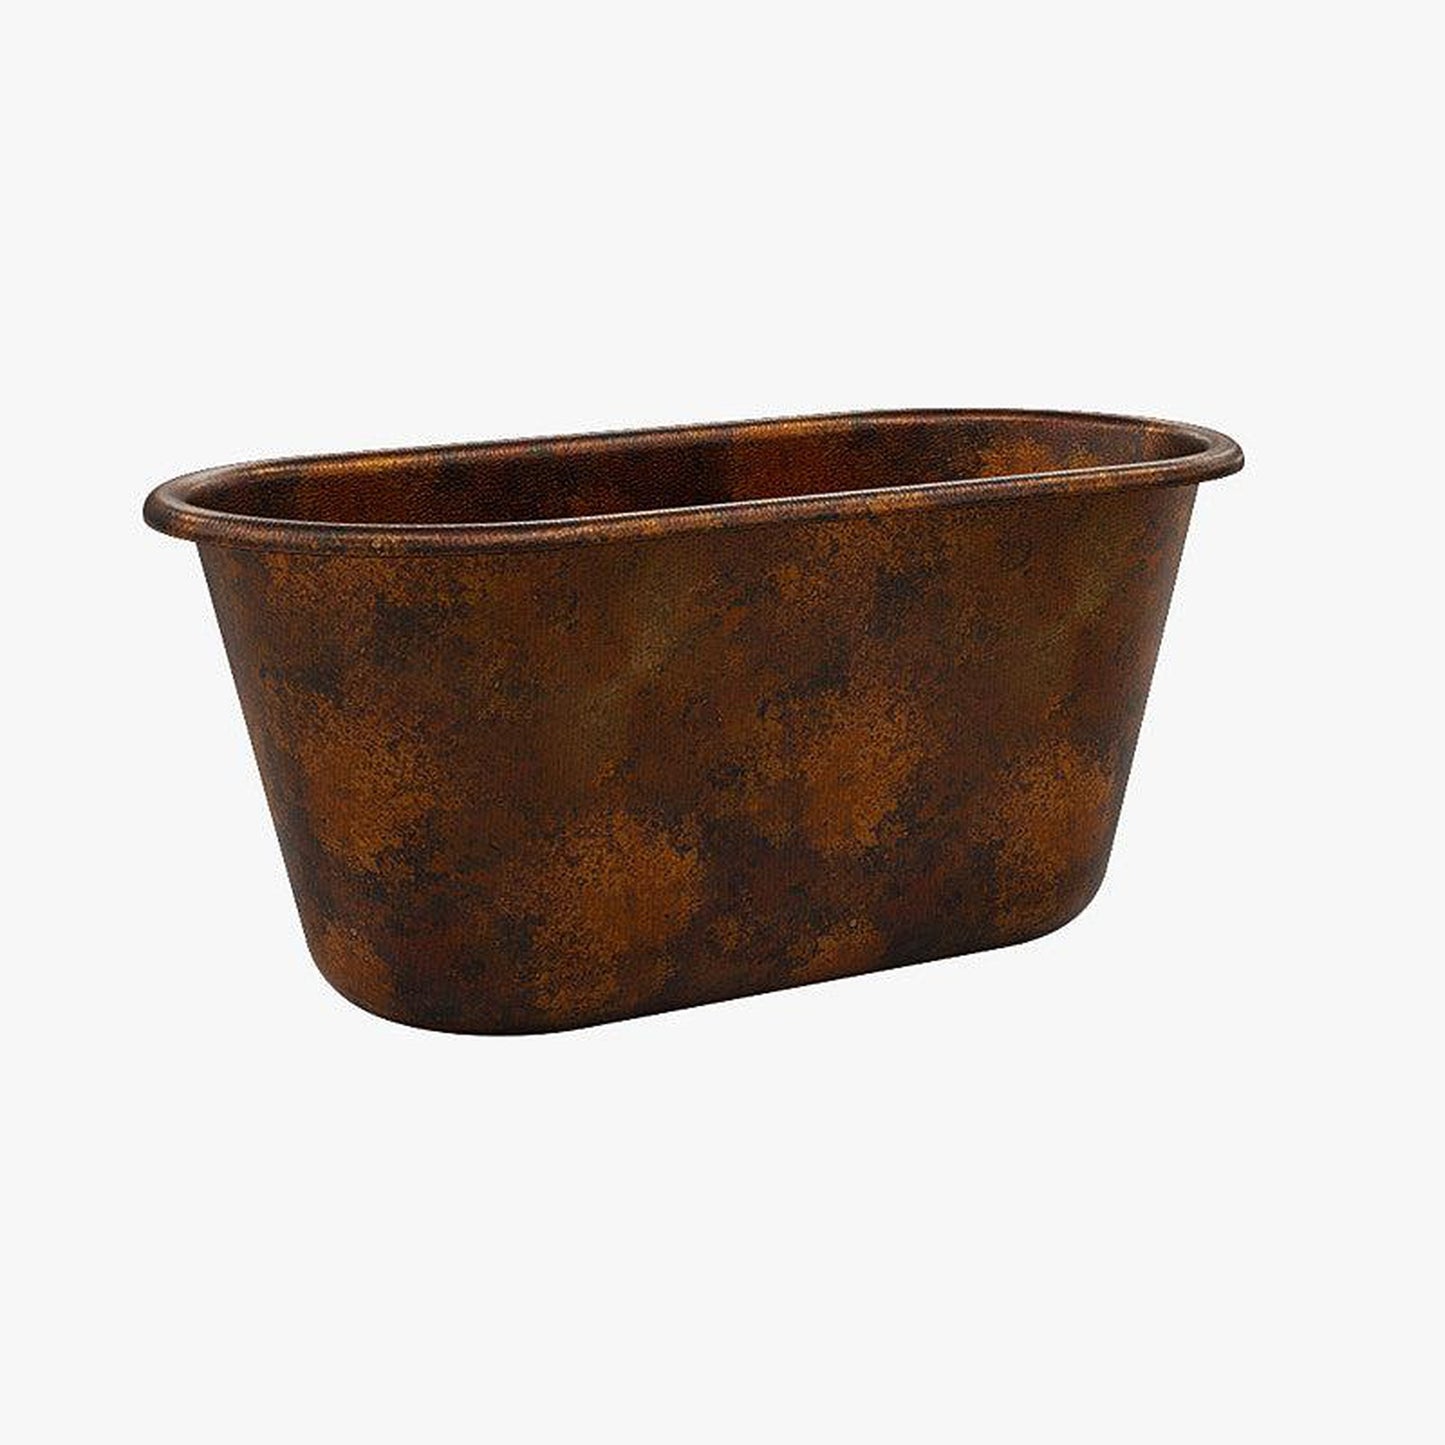 CopperSmith Heritage HX1 64" x 31" x 31" 16-Gauge Fire Copper Freestanding Bathtub With Fire Copper Interior and Brushed Nickel Push Button Tub Drain and Oil Rubbed Bronze Tub Filler